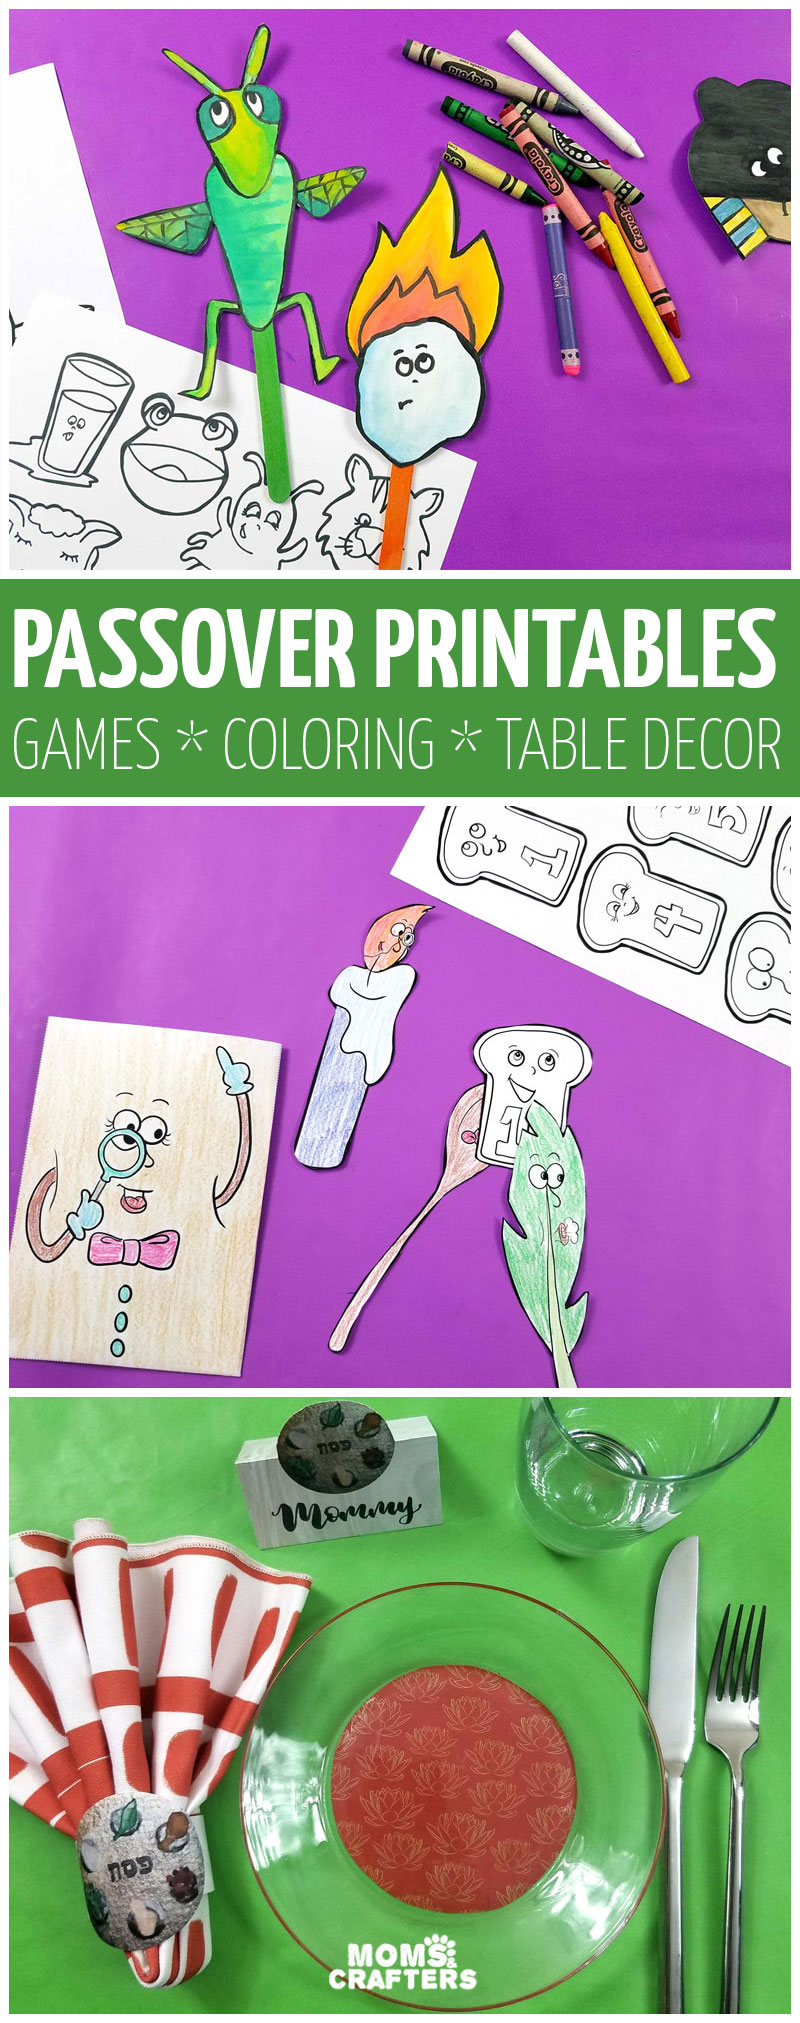 Passover printables